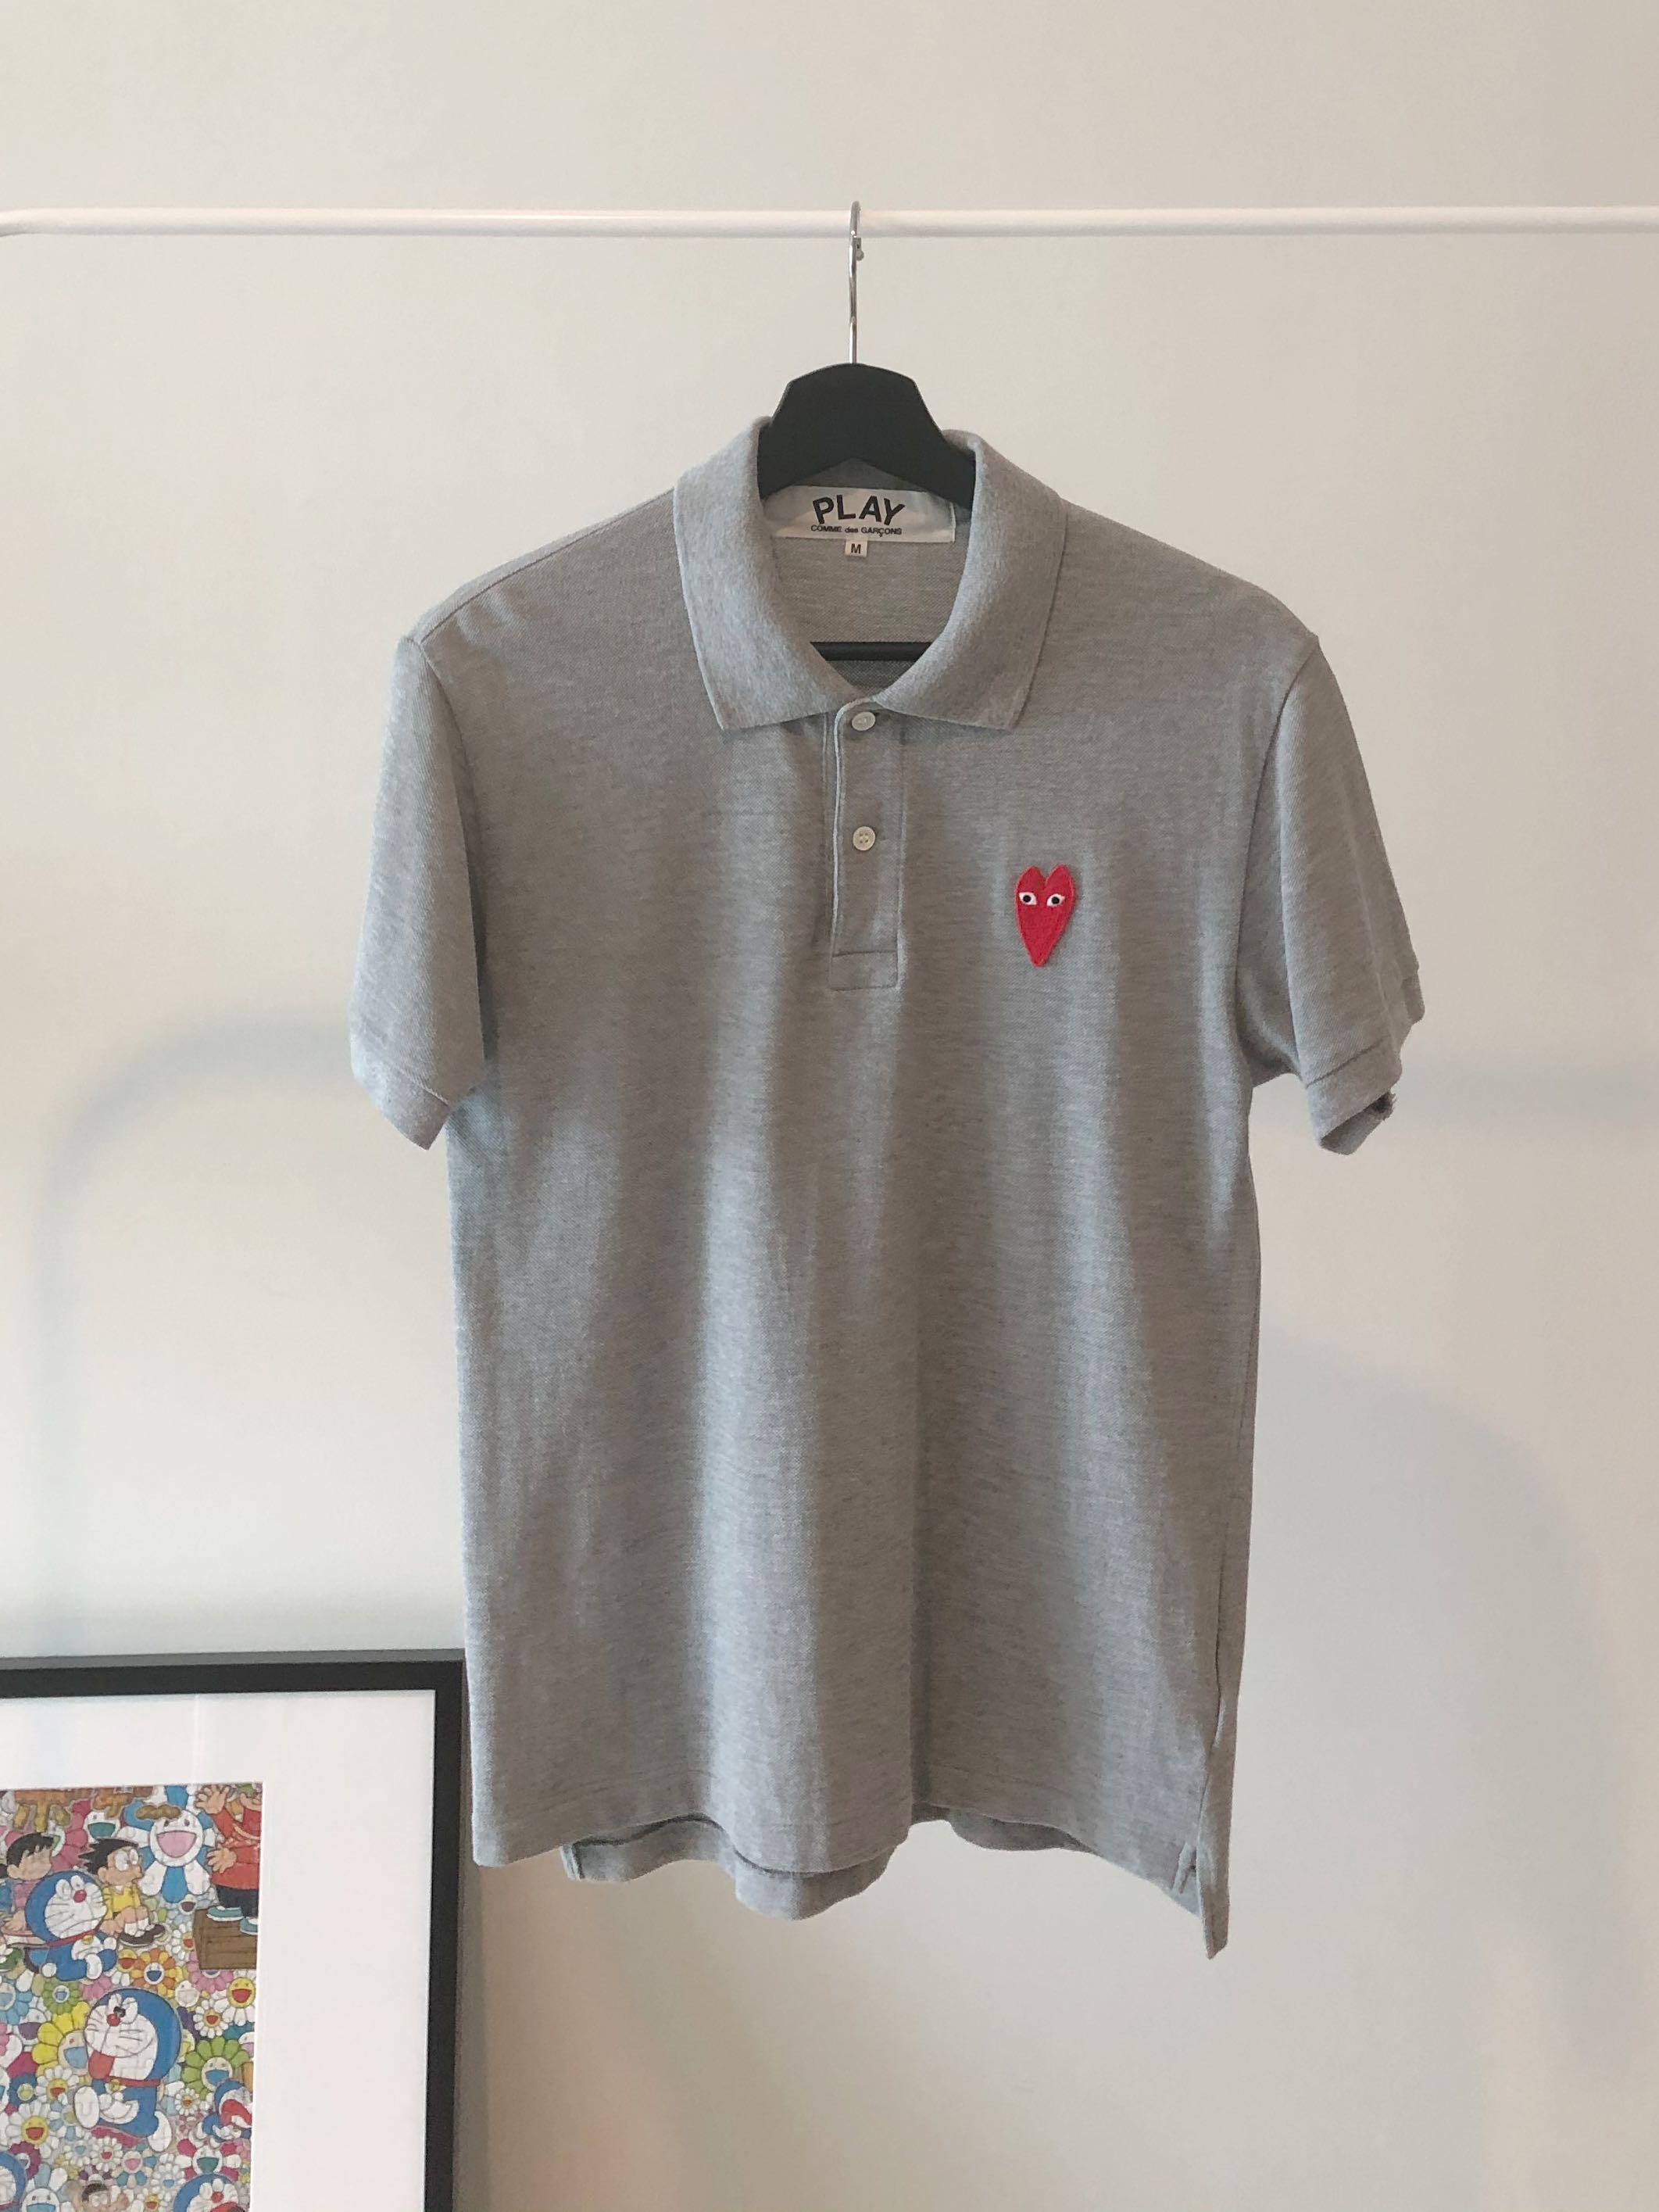 cdg polo shirt philippines